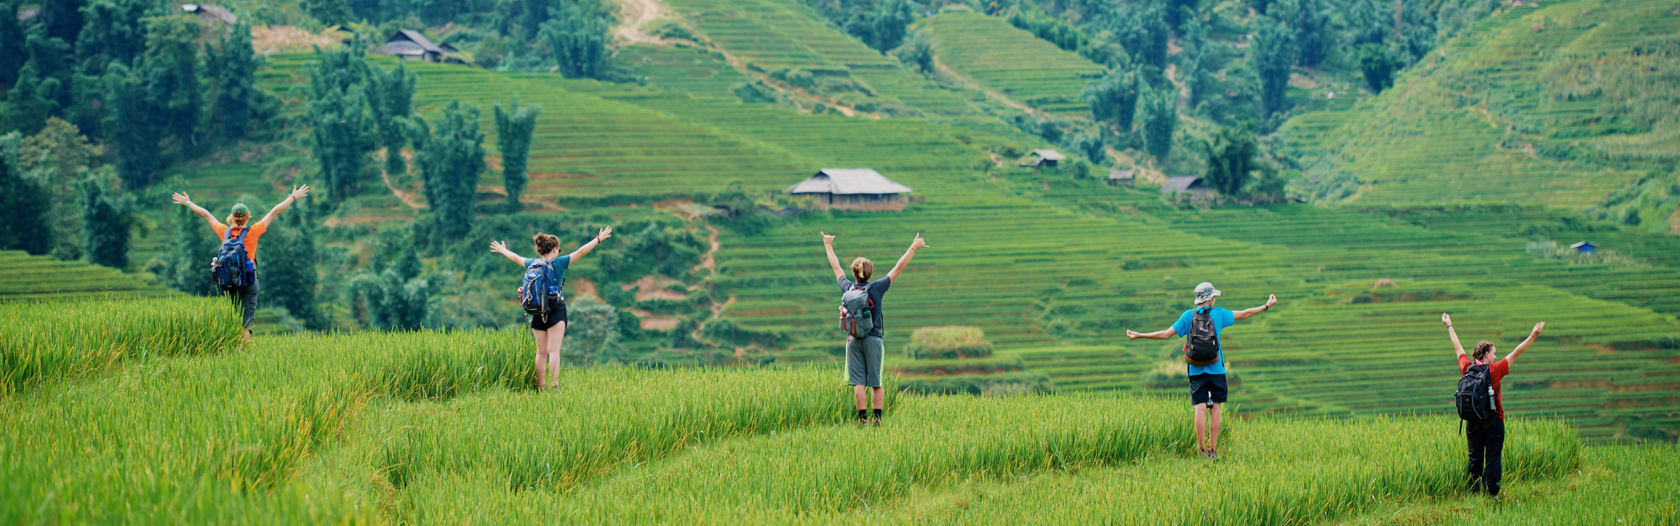 Five people with their arms in the air in rice fields in Vietnam.